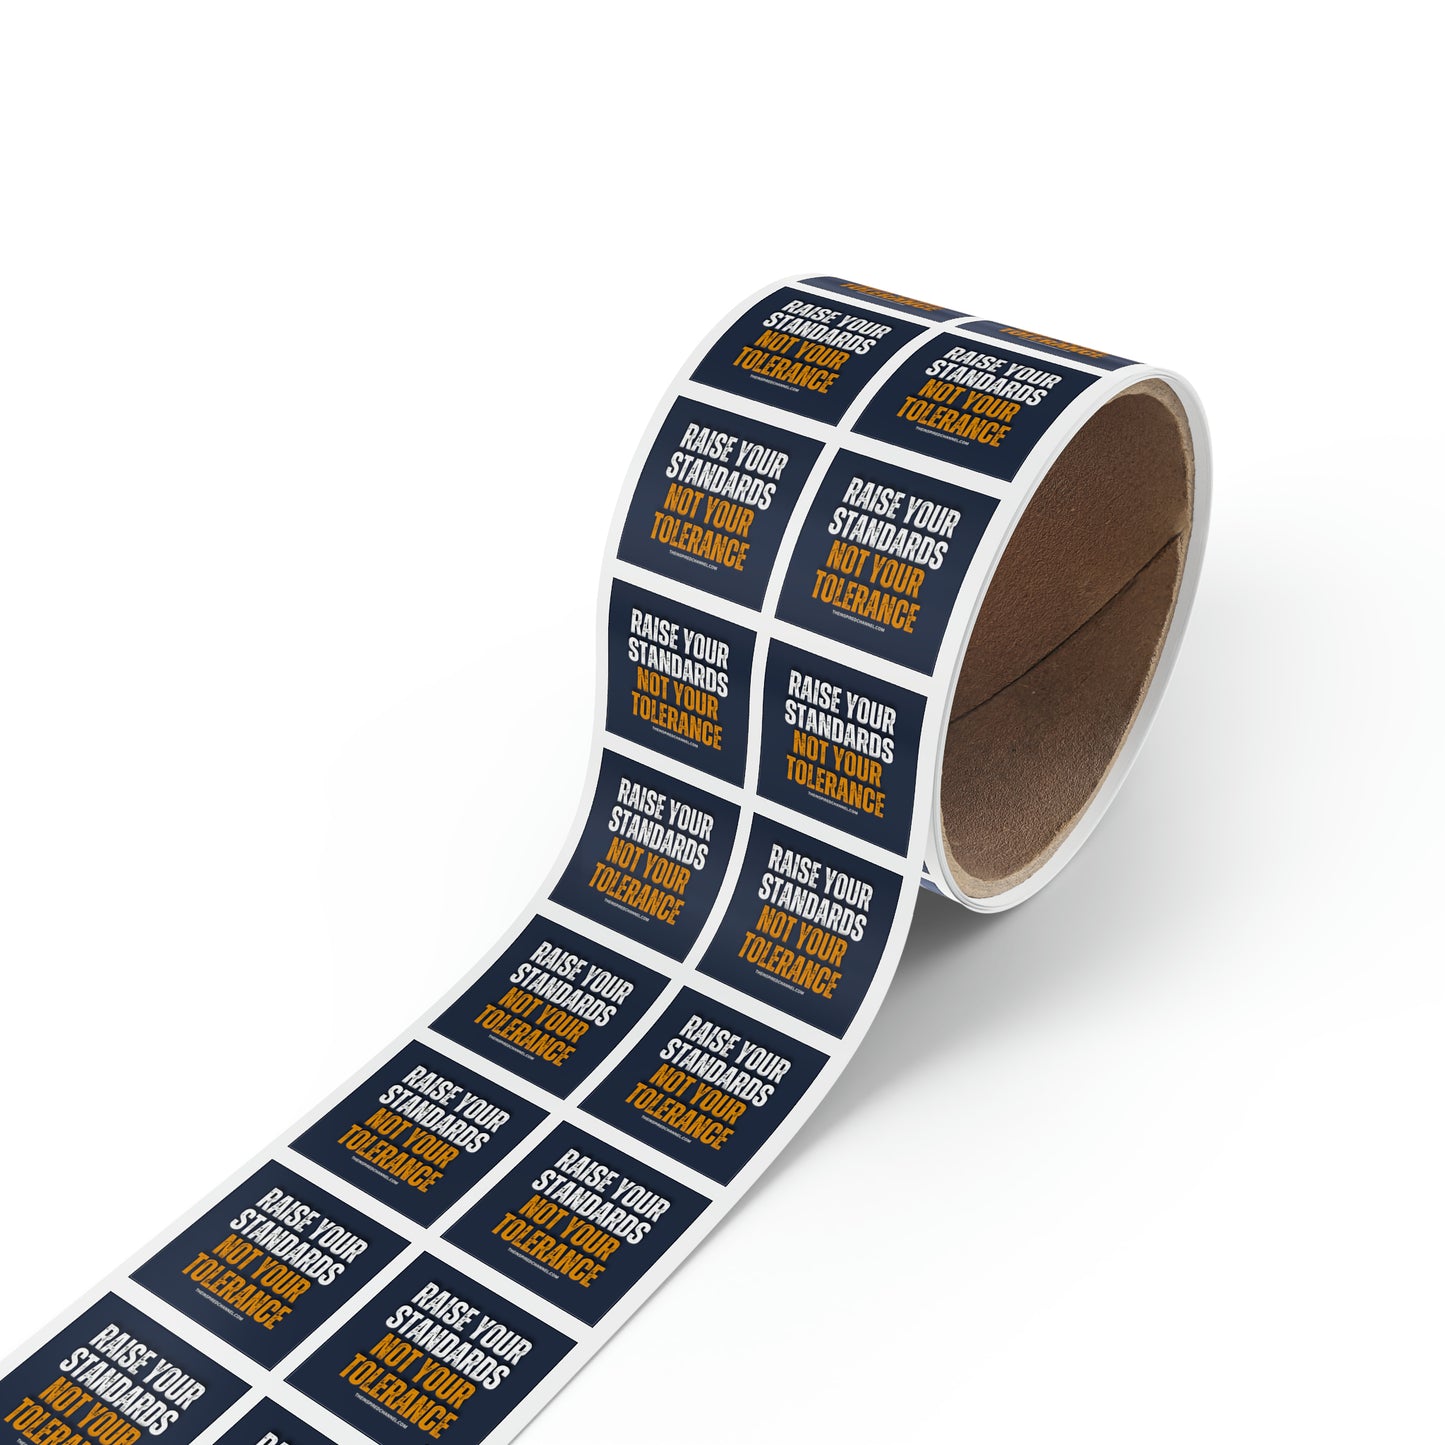 INSPIRED RAISE YOUR STANDARDS... Square Sticker Label Rolls